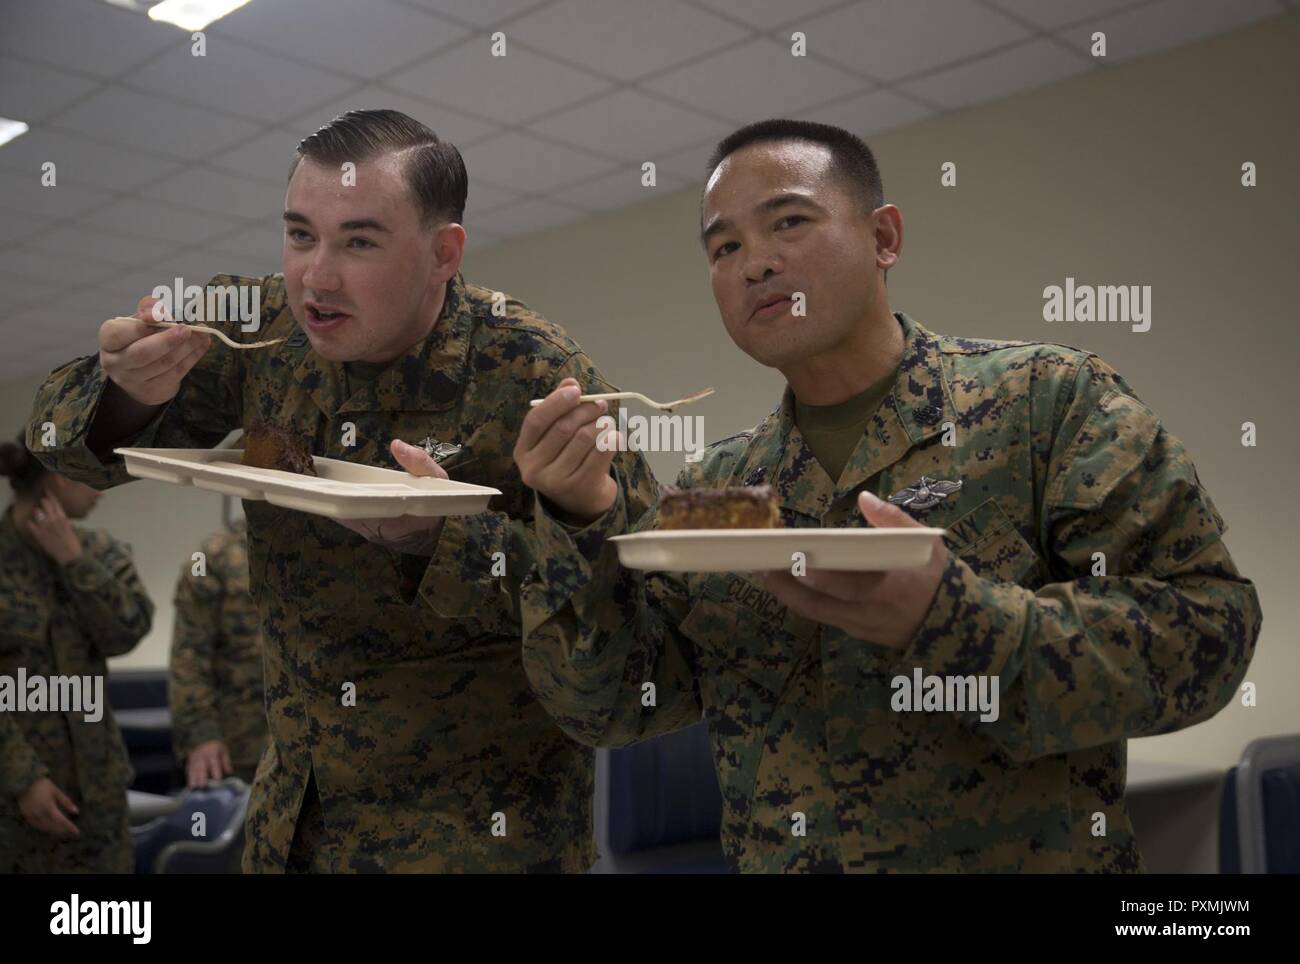 Chief Hospital Corpsman (Fleet Marine Force) Edgar E. Cuenca, right, a preventive medicine technician with Command Element, III Marine Expeditionary Force, and Hospital Corpsman (FMF) Joseph E. Clack, left, a corpsman assigned to 3rd Medical Battalion, 3rd Marine Logistics Group, III MEF, take the first bite of the ceremonial cake during a celebration for the 119th birthday of the hospital corpsman rate at Camp Mujuk, Pohang, Republic of Korea, June 17, 2017. Marines from Bravo Company, 3rd Law Enforcement Battalion, III Marine Headquarters Group, III MEF and Corpsmen with 3rd Med Bn, 3rd MLG, Stock Photo